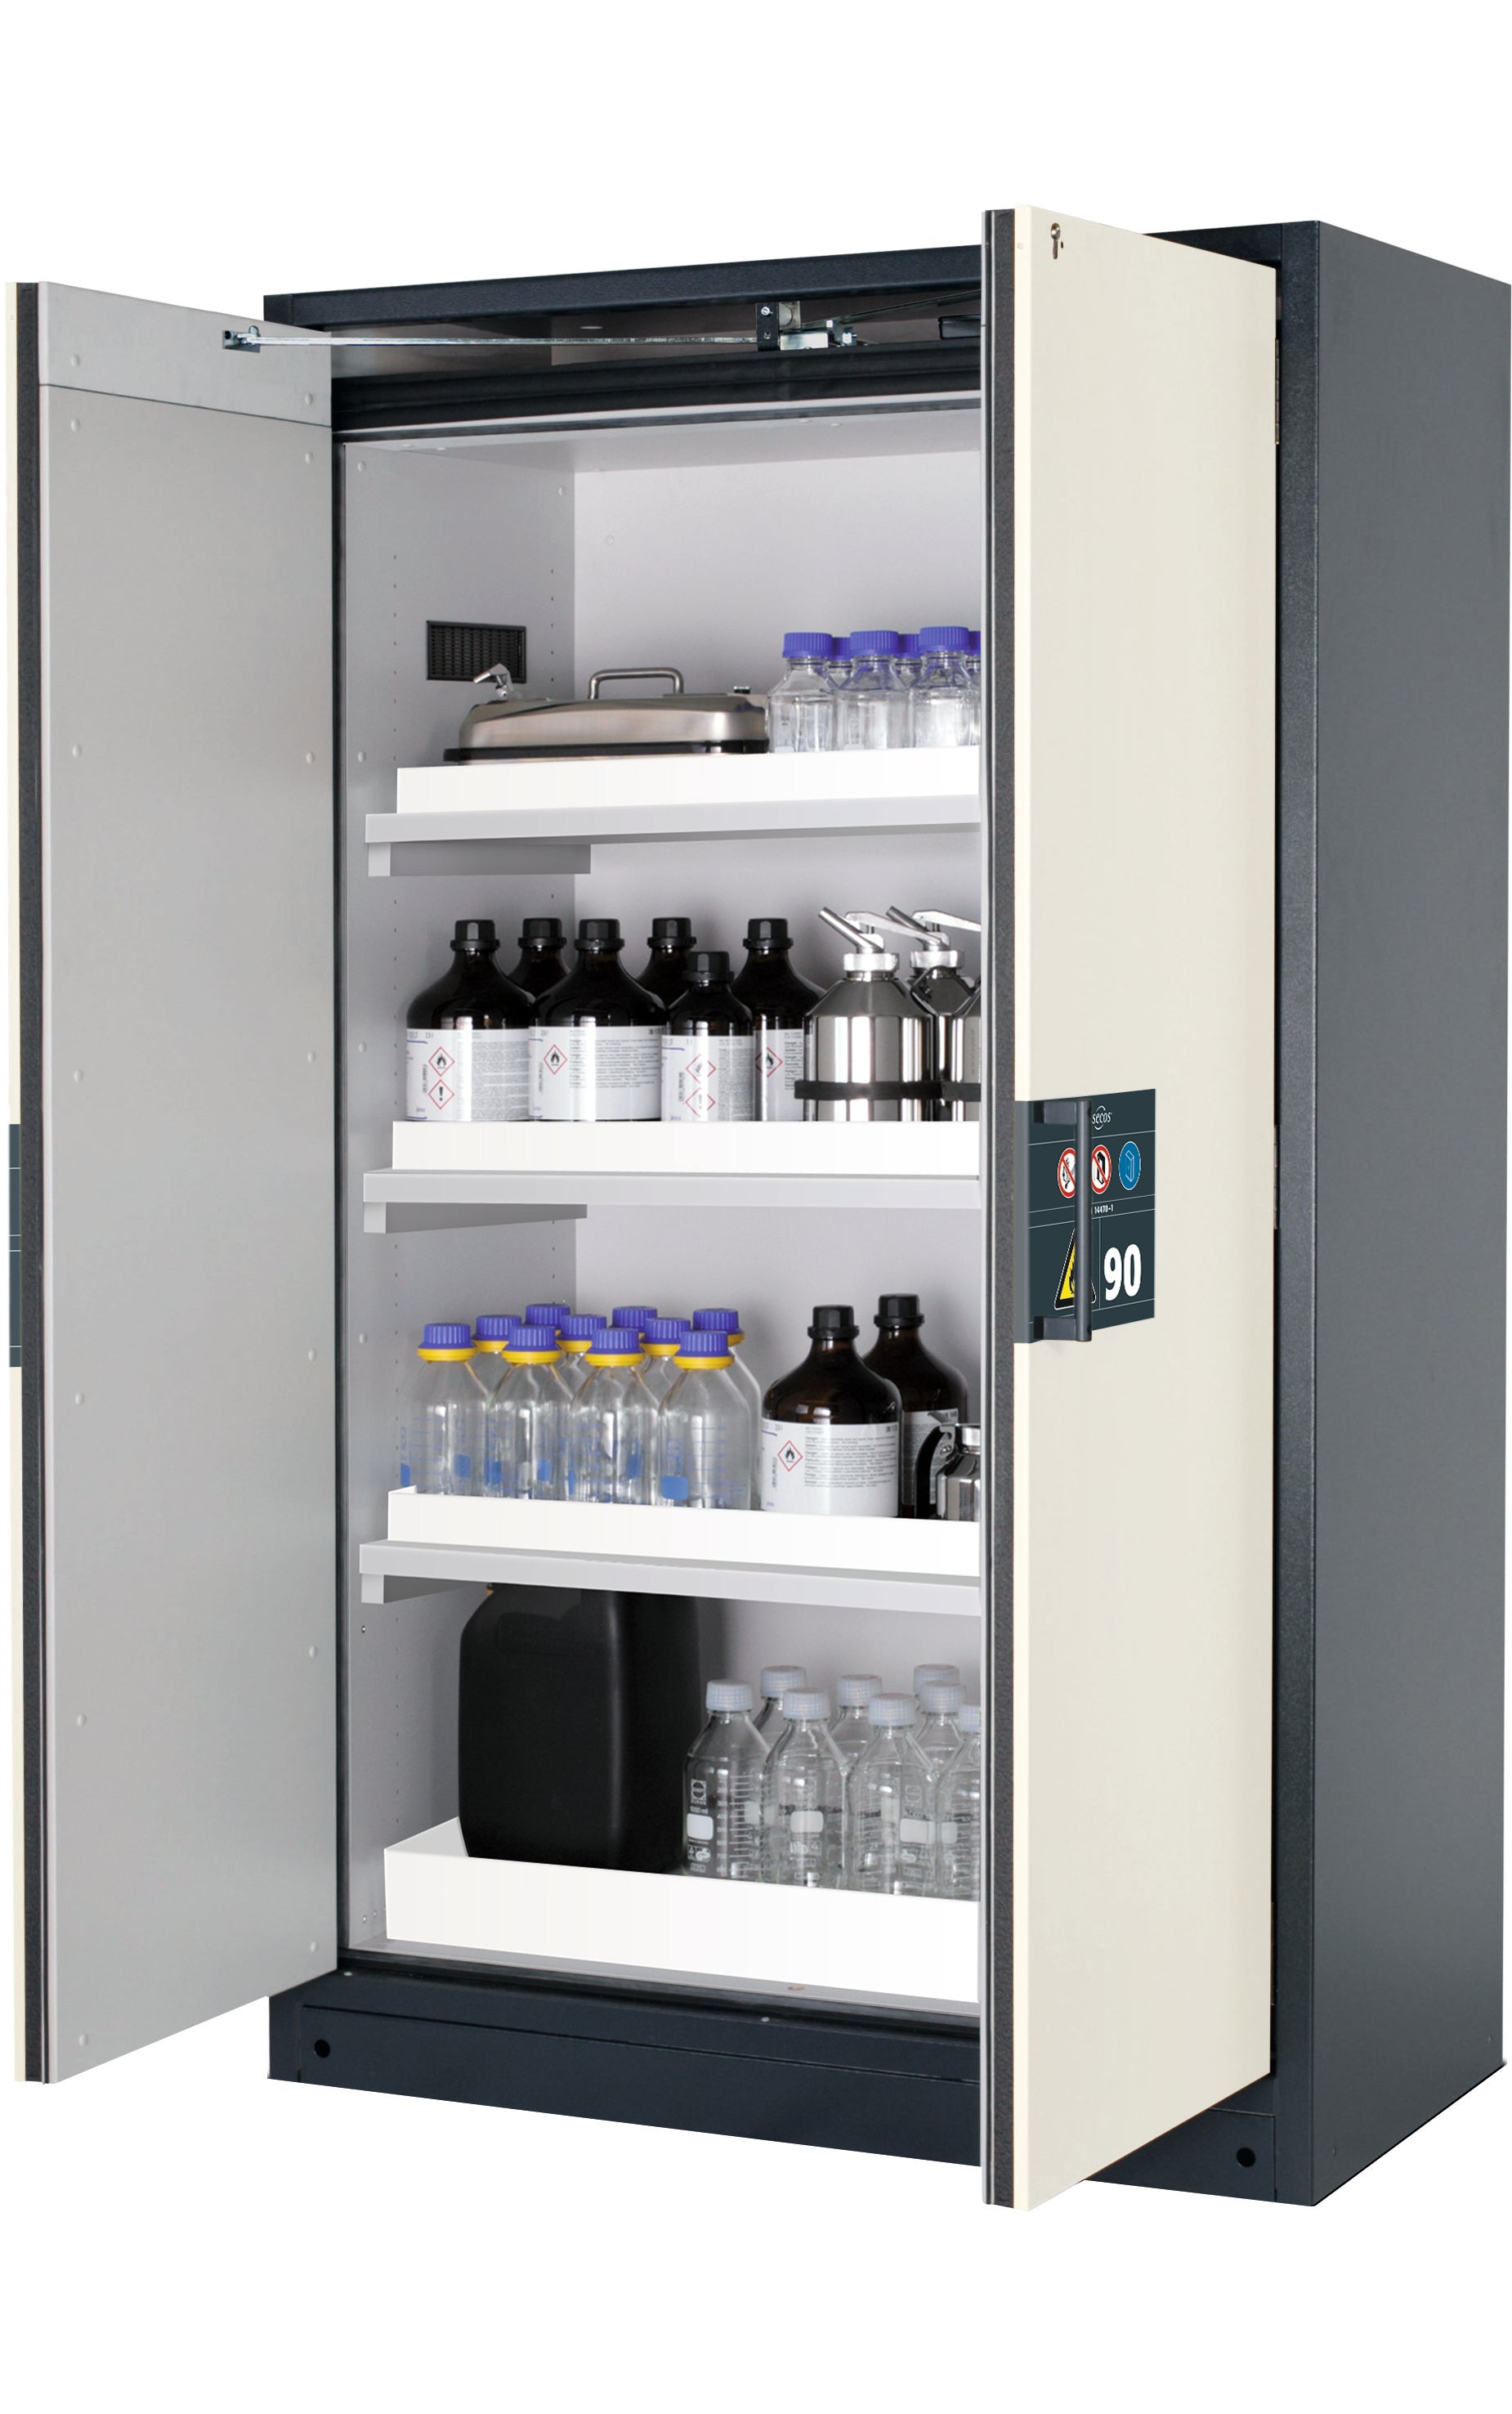 Type 90 safety storage cabinet Q-PEGASUS-90 model Q90.195.120.WDAC in pure white RAL 9010 with 3x tray shelf (standard) (polypropylene),